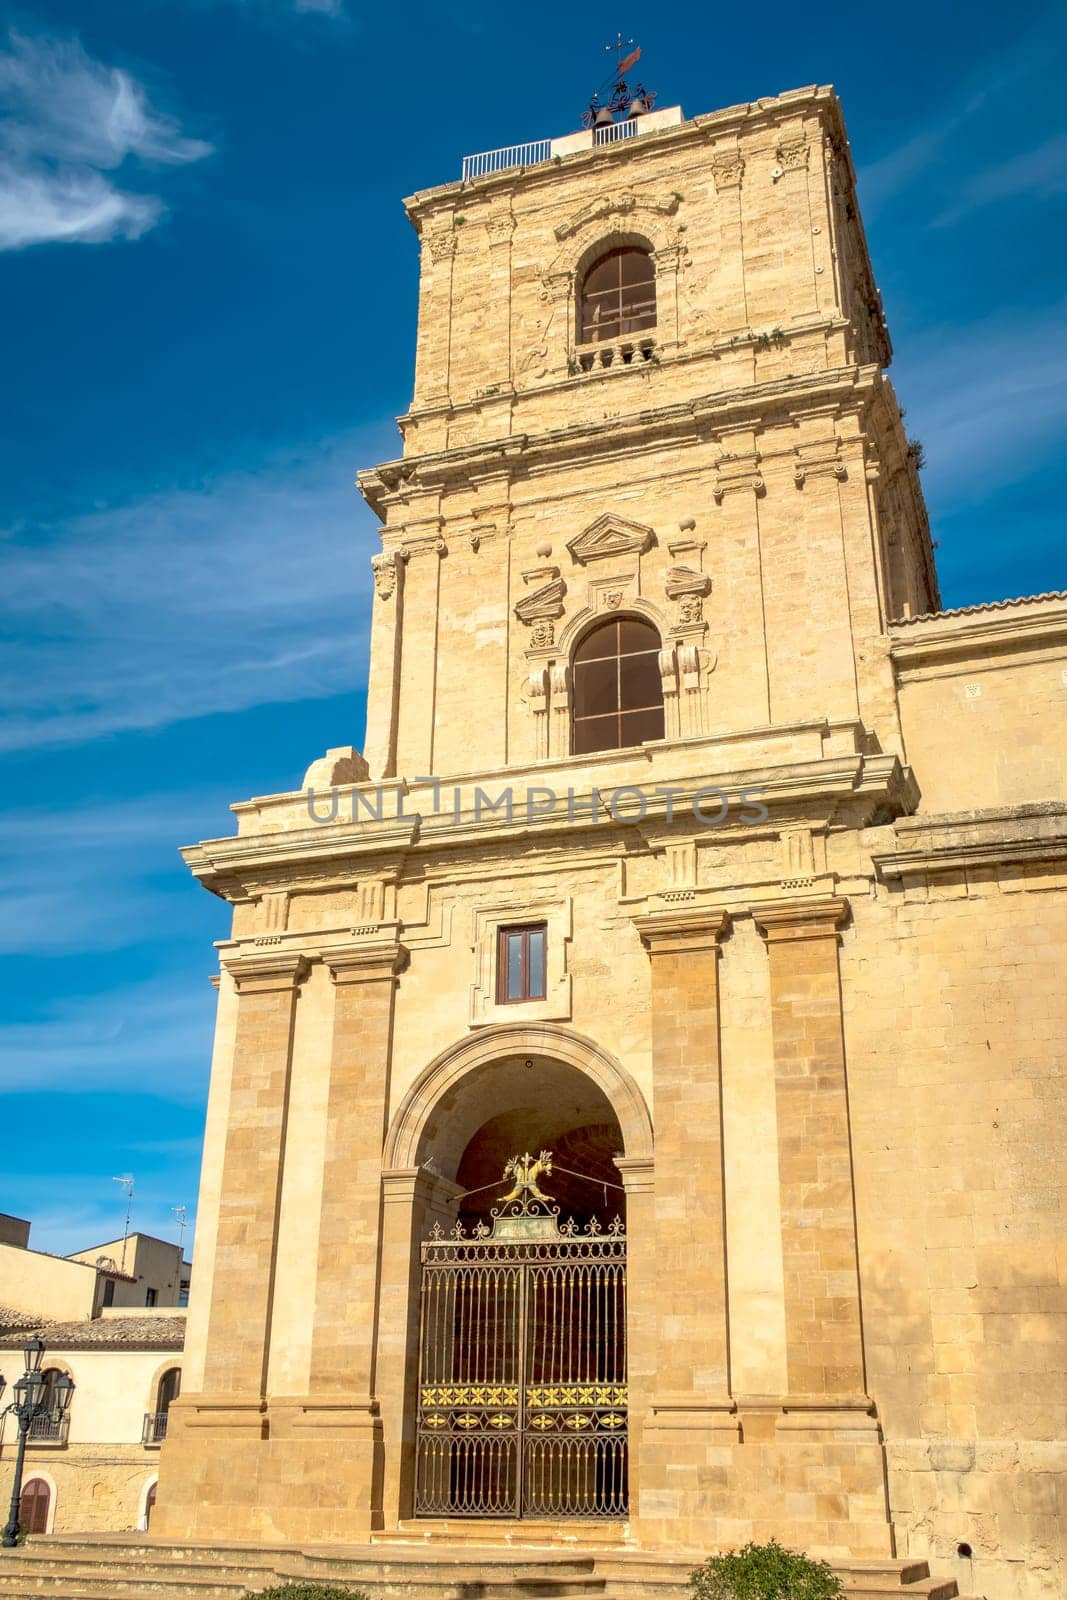 The cathedral of Enna in Sicily, Italy.  Vertical view